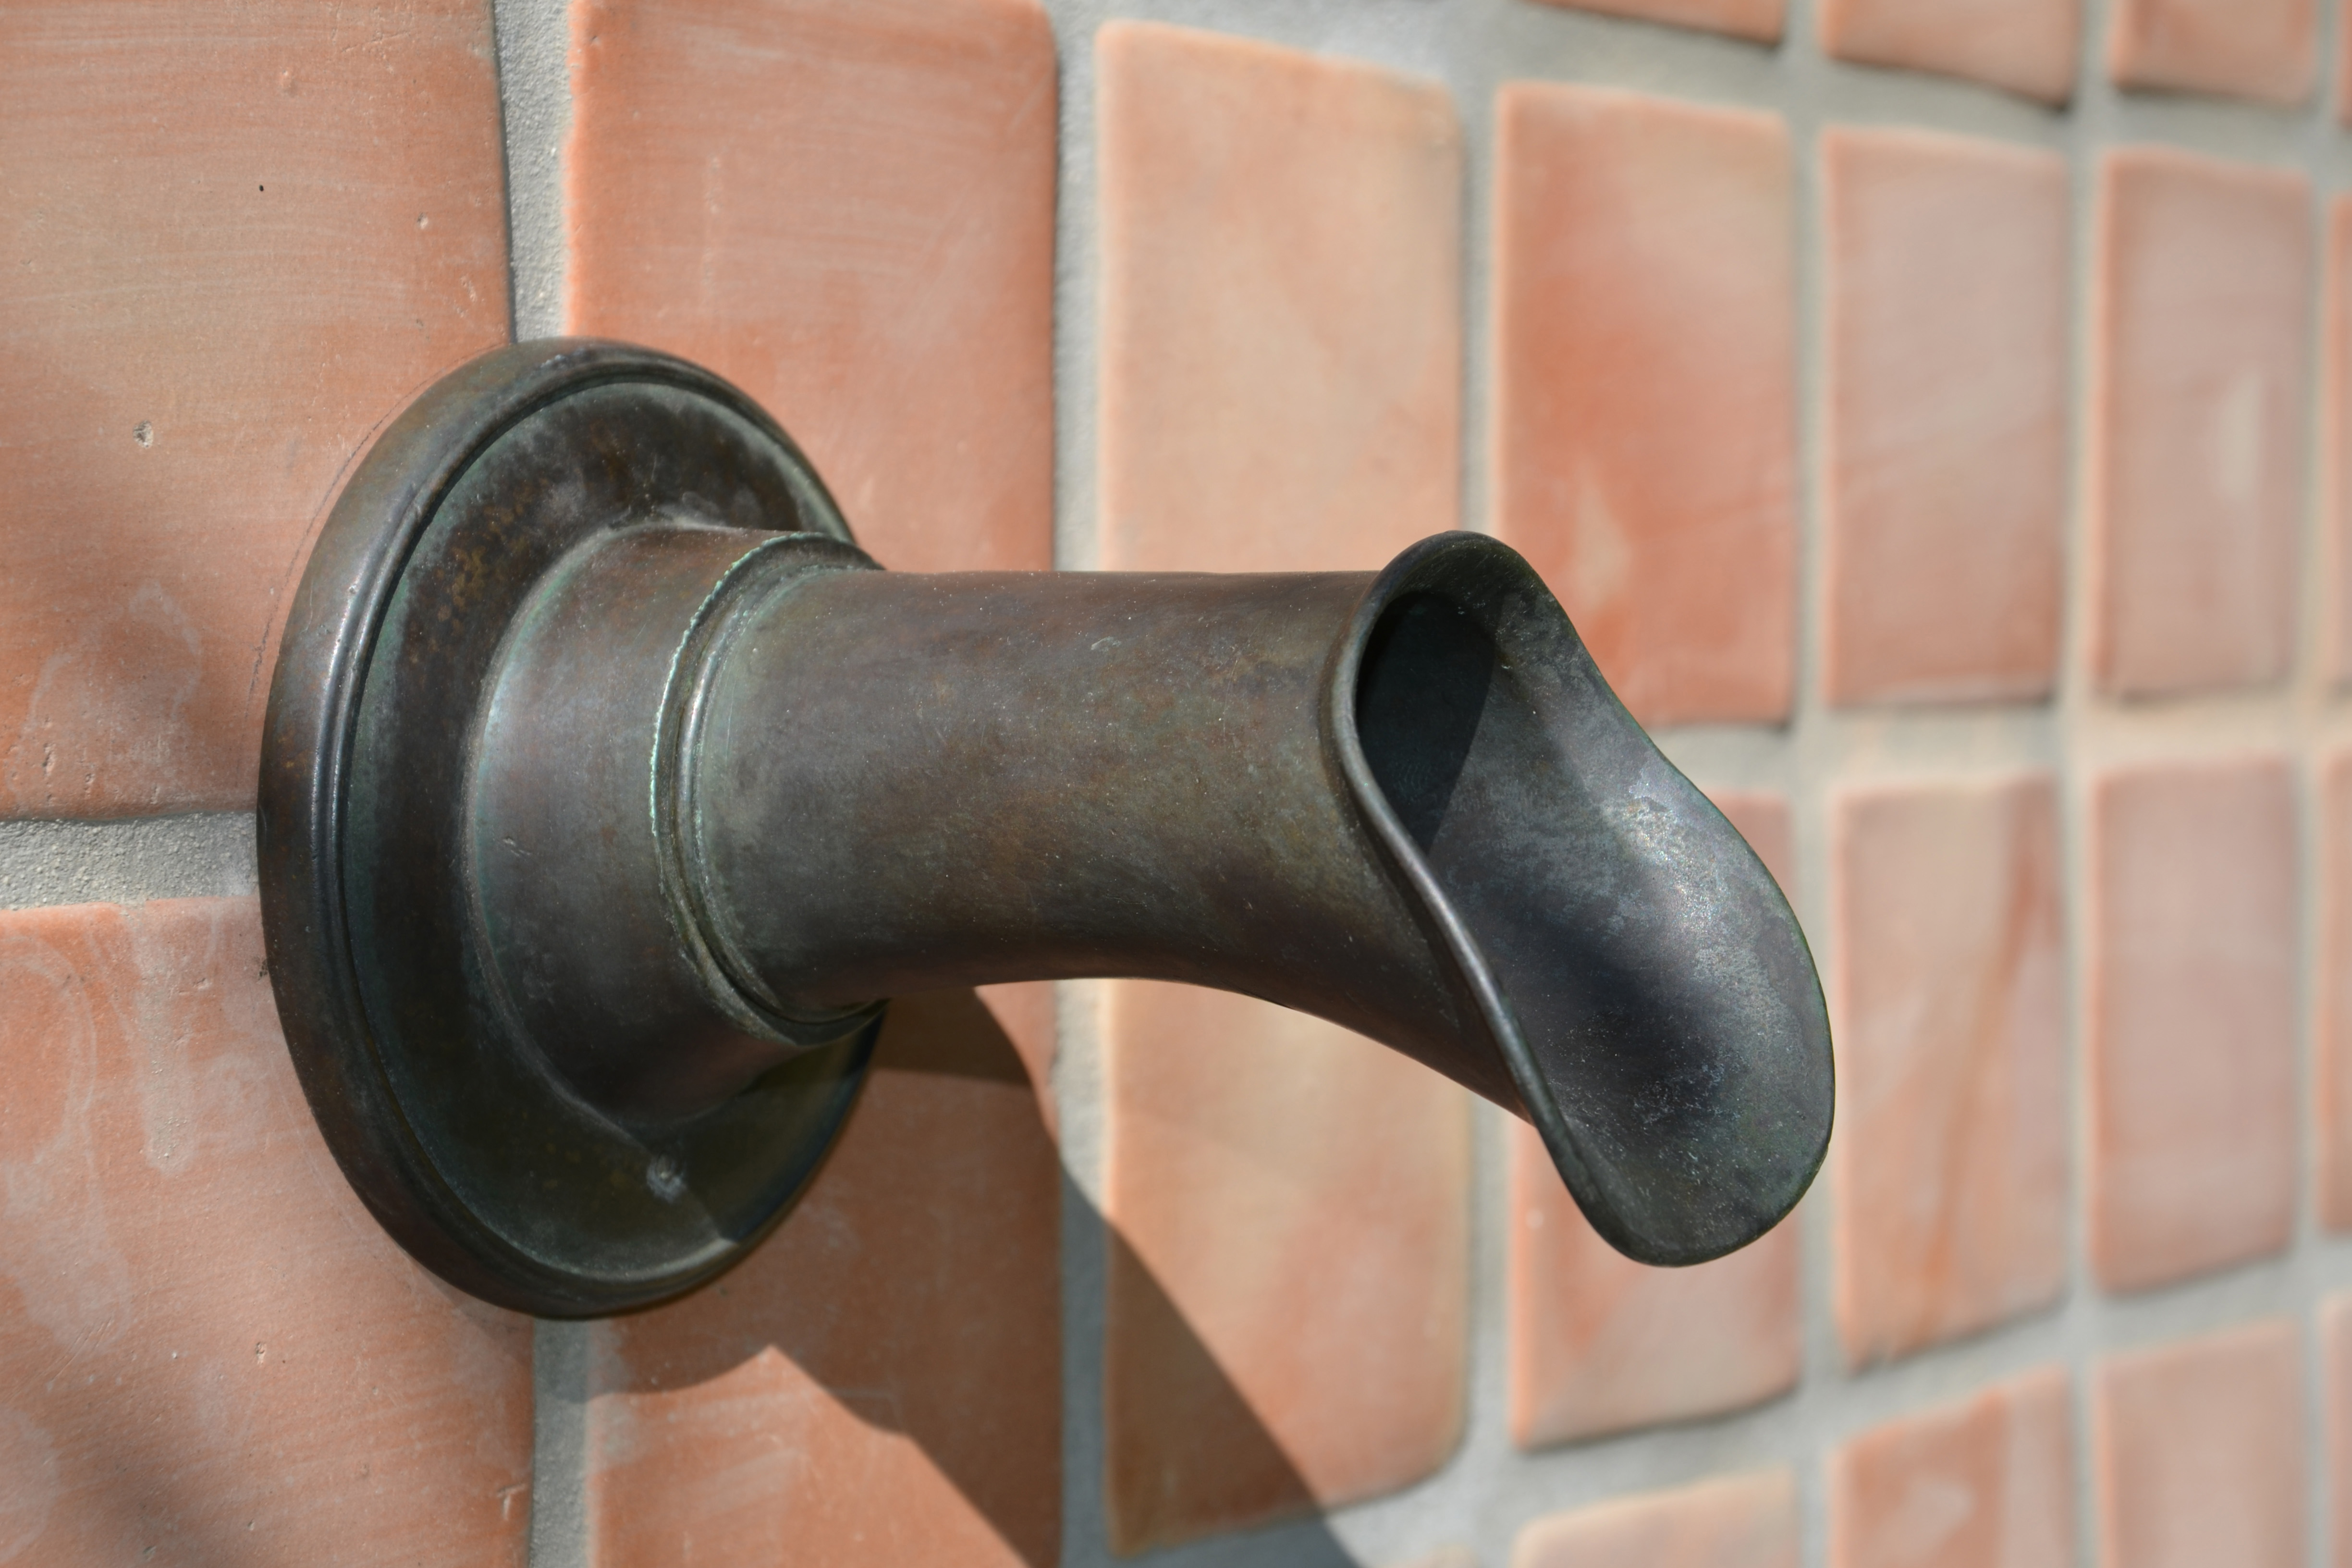 The Oona: a bronze fountain spout with a round cross section and elegant flare